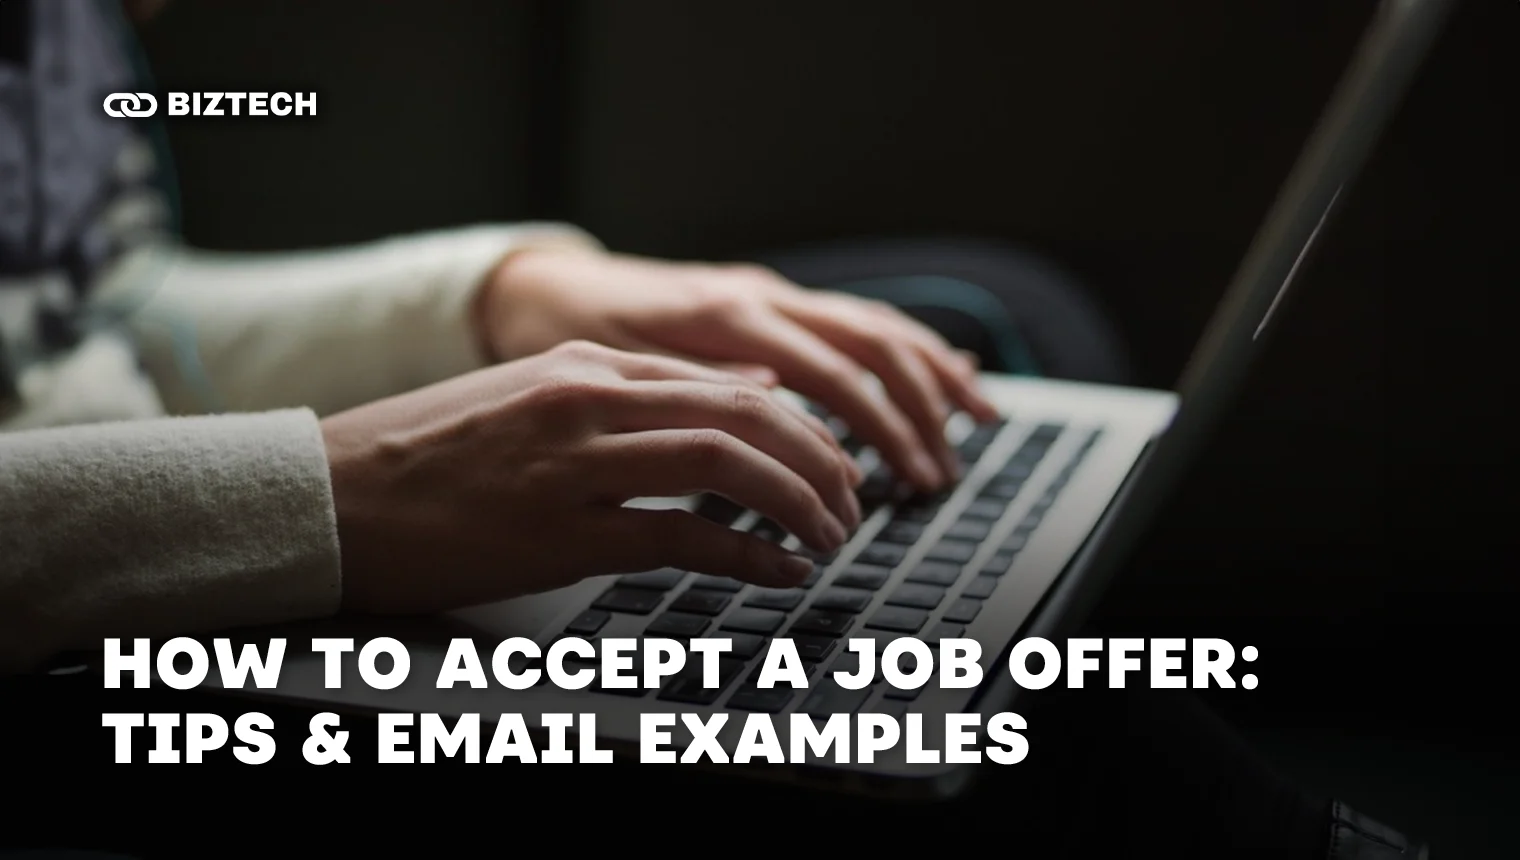 How to Accept a Job Offer: Tips & Email Examples